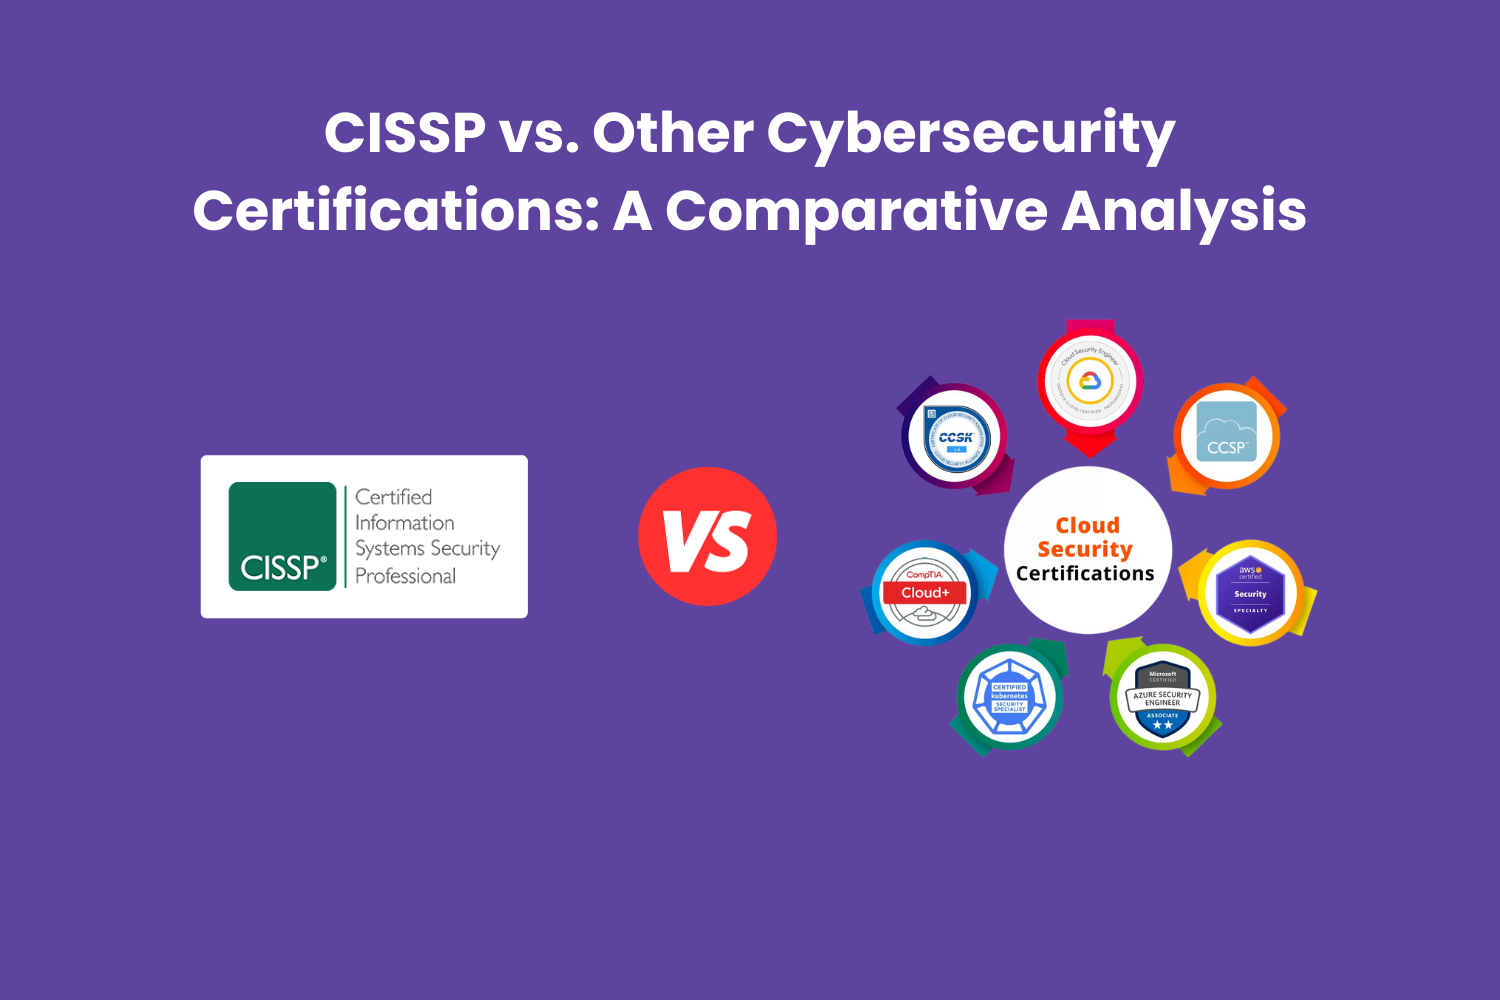 CISSP vs. Other Cybersecurity Certifications: A Comparative Analysis